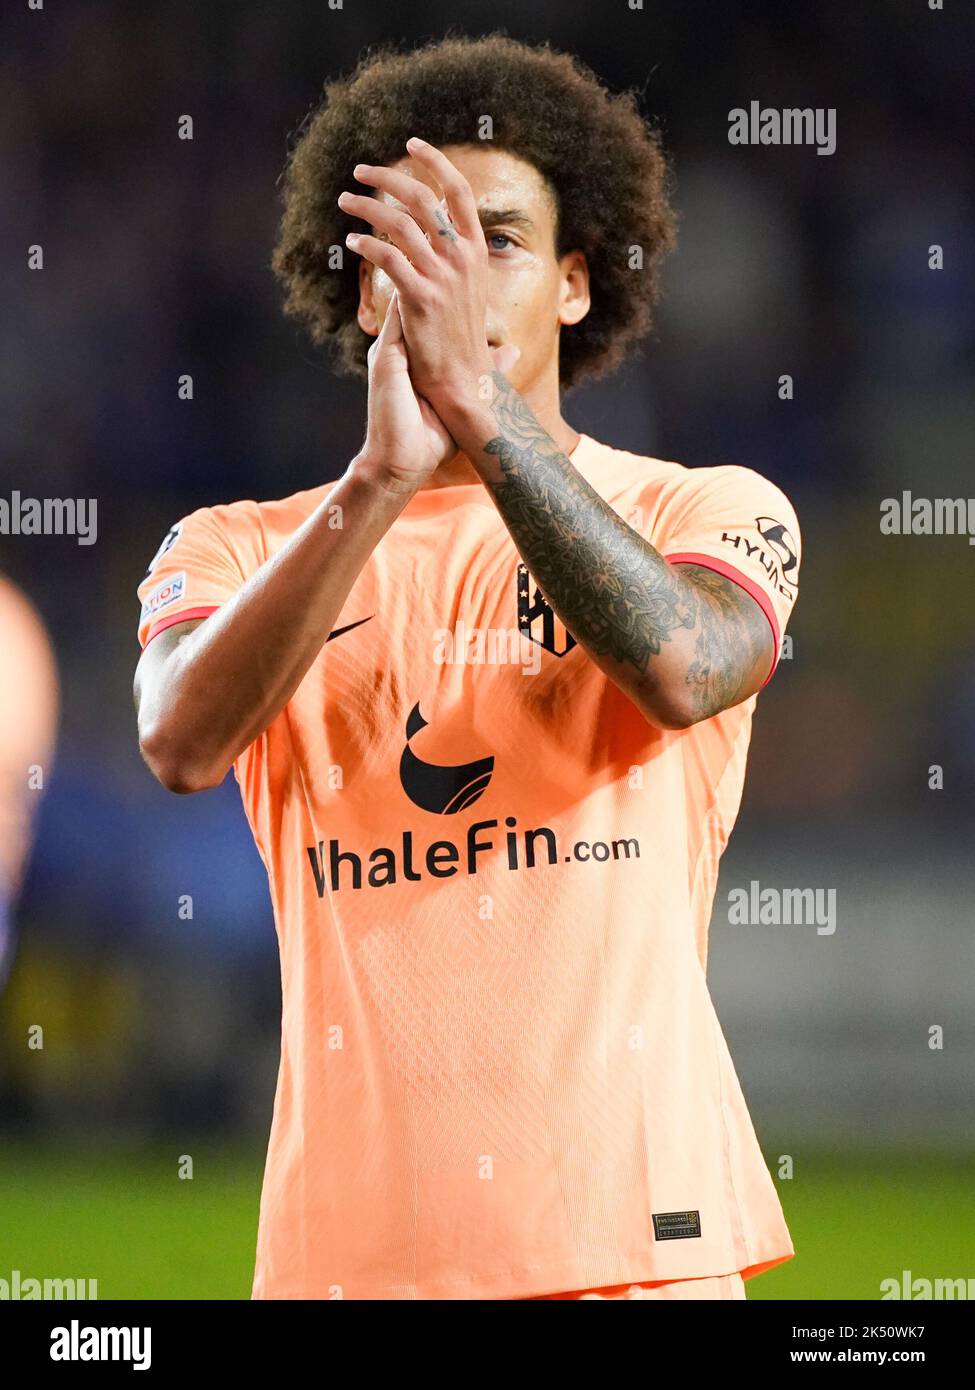 BRUGGES, BELGIUM - OCTOBER 4: Axel Witsel of Atletico Madrid looks dejected and applauds for the fans after the Group B - UEFA Champions League match between Club Brugge KV and Atletico Madrid at the Jan Breydelstadion on October 4, 2022 in Brugges, Belgium (Photo by Joris Verwijst/Orange Pictures) Stock Photo